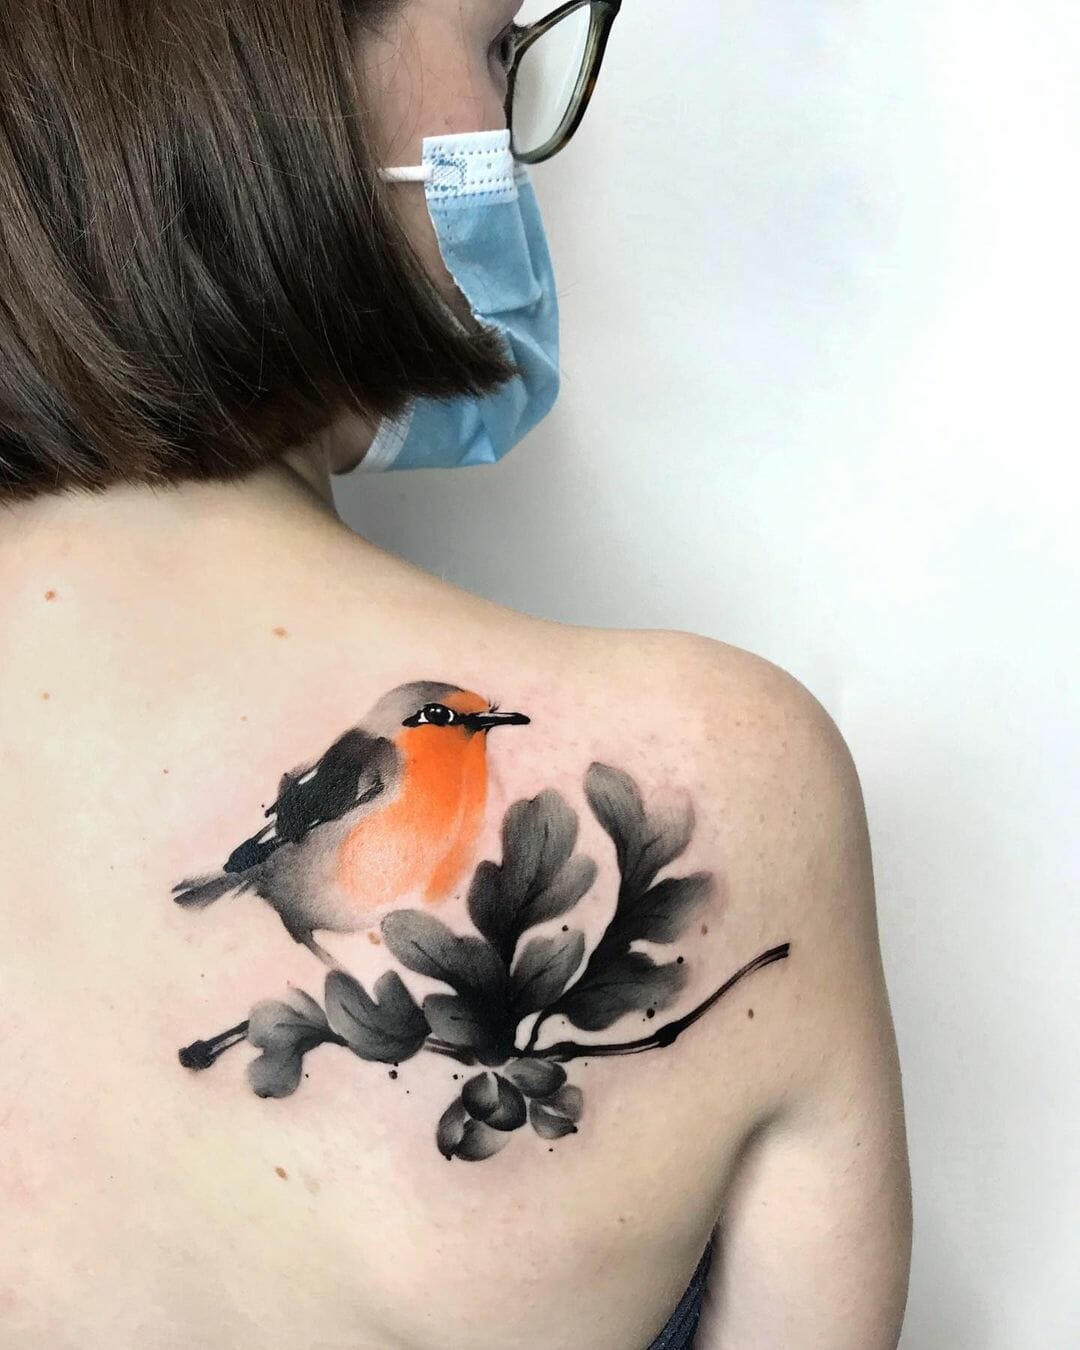 Old Smithy Tattoo Parlour - Happy New Year and all that jazz🎉🎉 How cute  is this little guy 😍😍 @holliemaytattooist would love to do more realistic  style birds or animals like this,